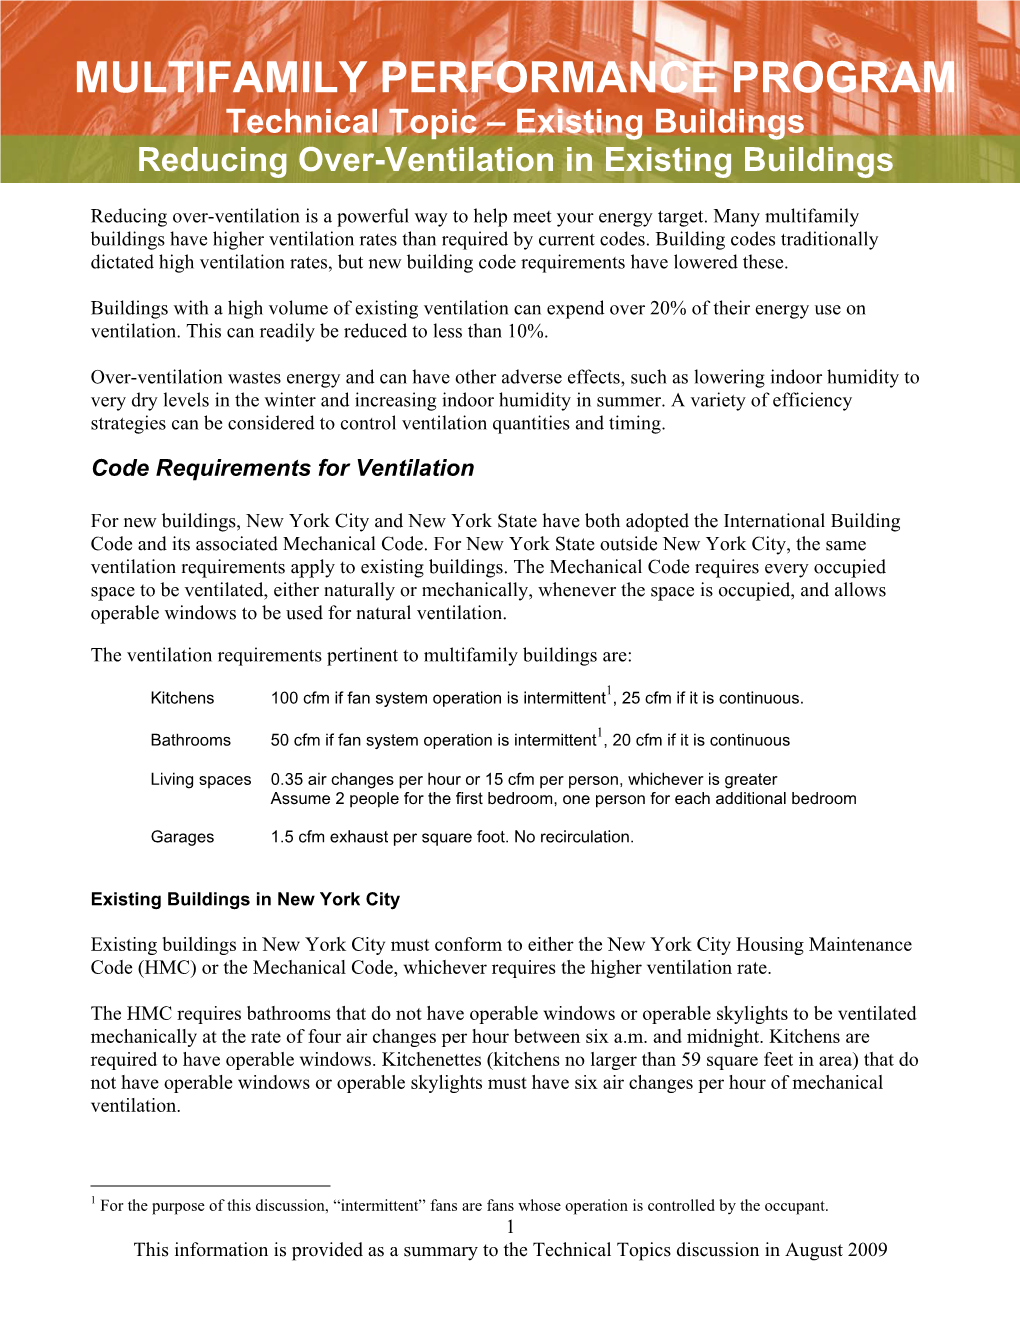 Reducing Over-Ventilation in Existing Buildings